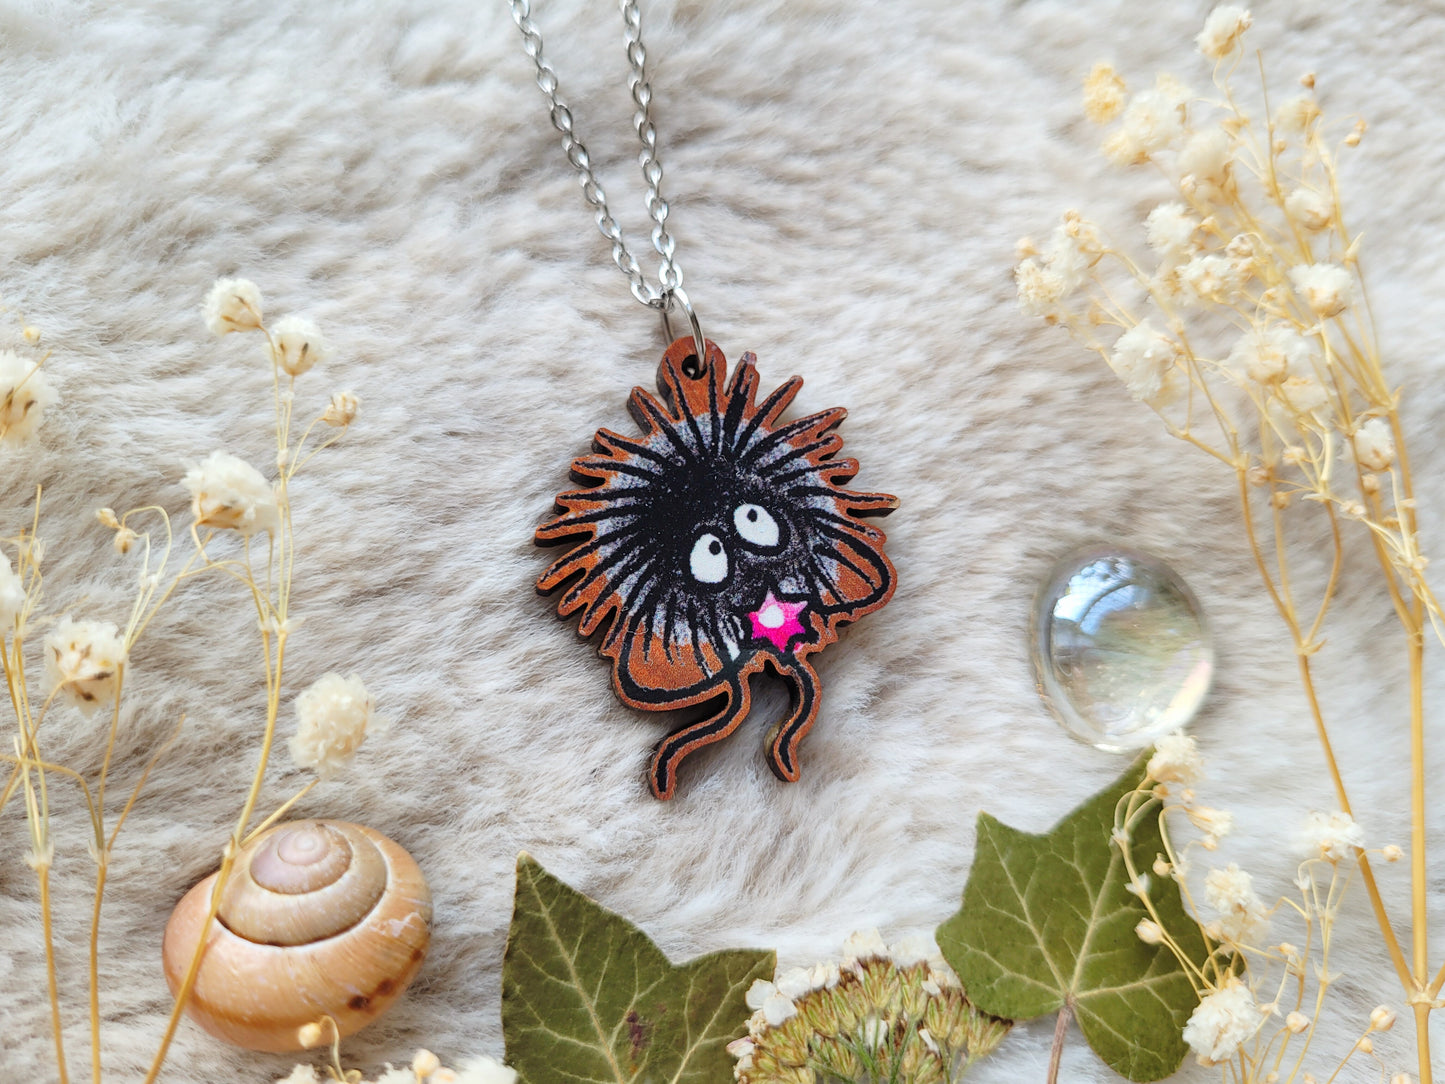 Soot Sprite Illustrated necklace, pink star, responsibly sourced cherry wood, chain options available, by Grace Moth